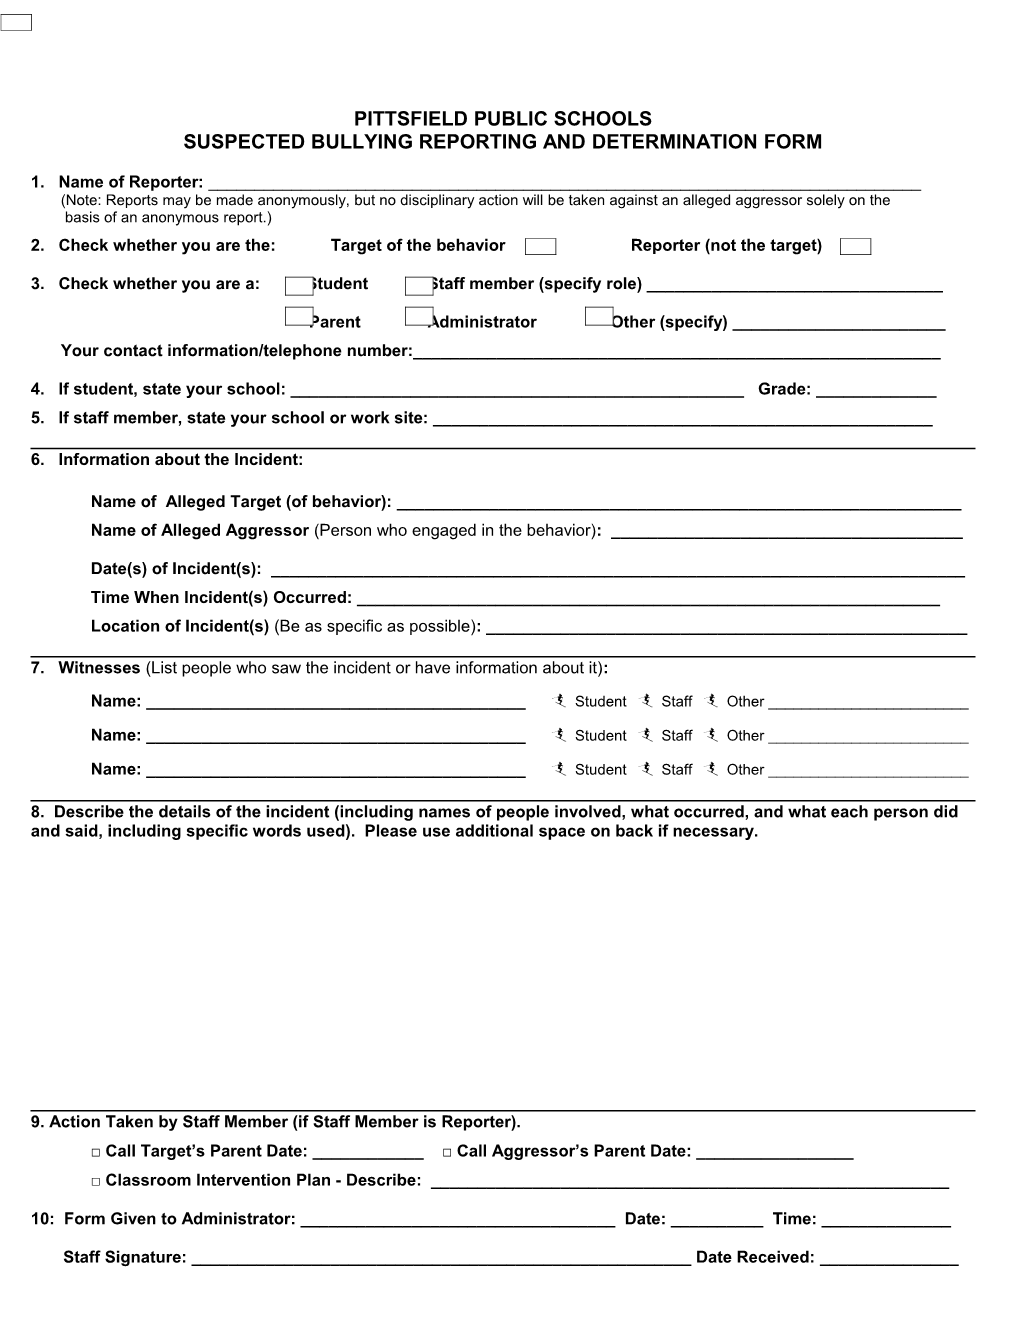 Sample Bullying Prevention and Intervention Incident Reporting Form